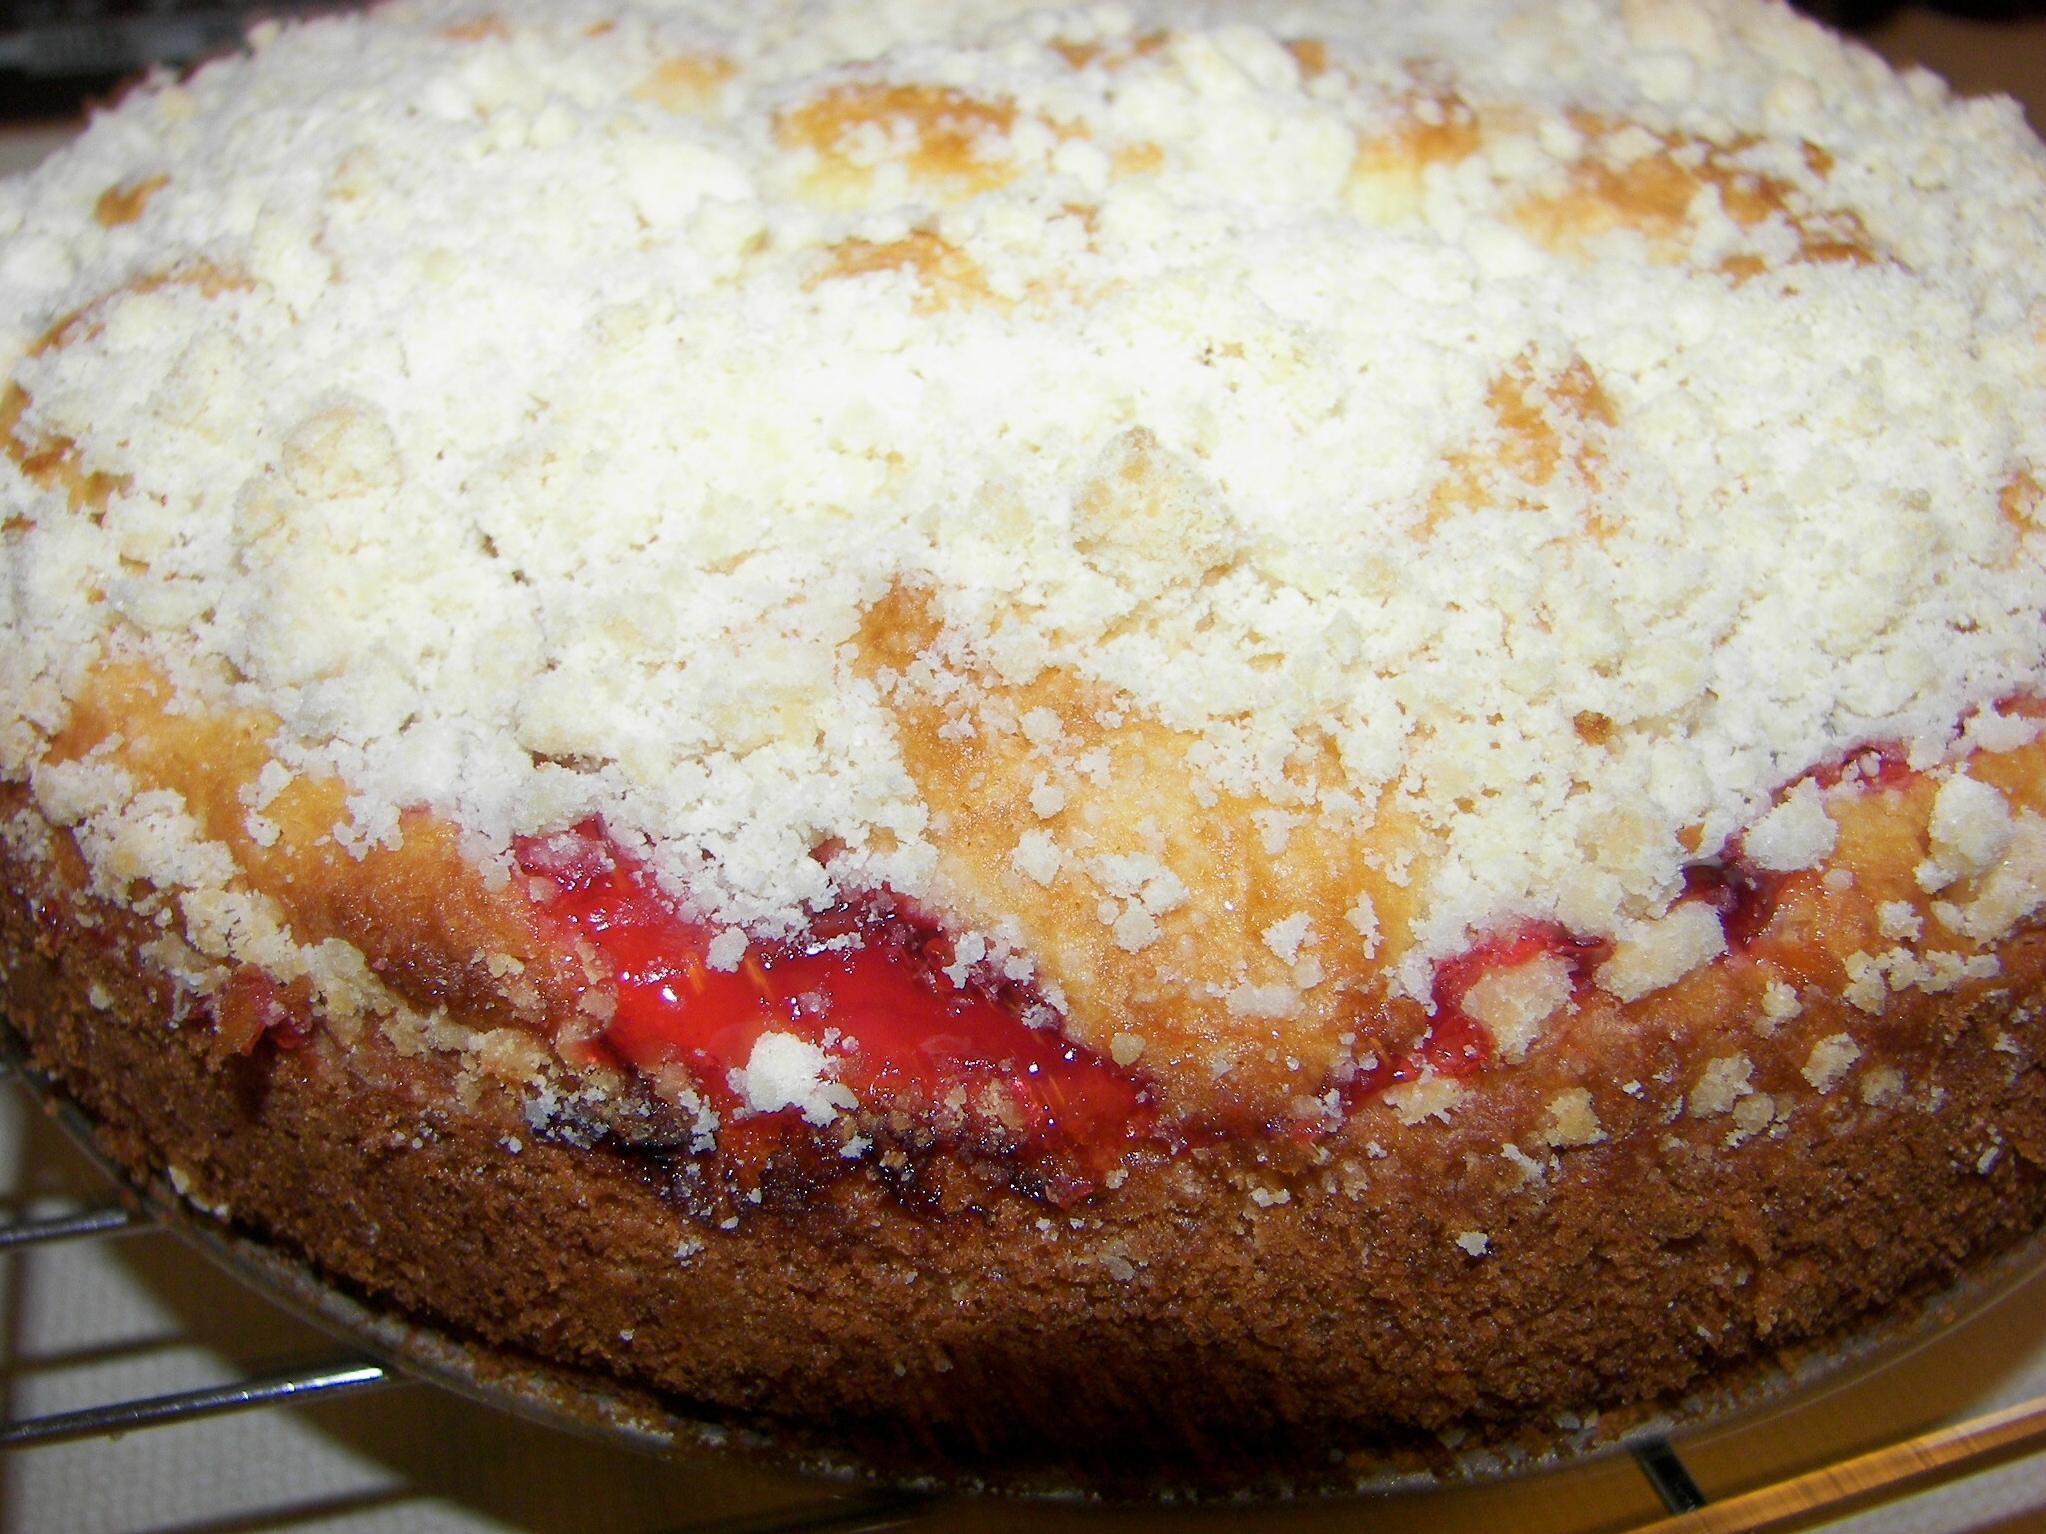  This coffee cake is filled with bursts of sweet cherry flavor in every bite.